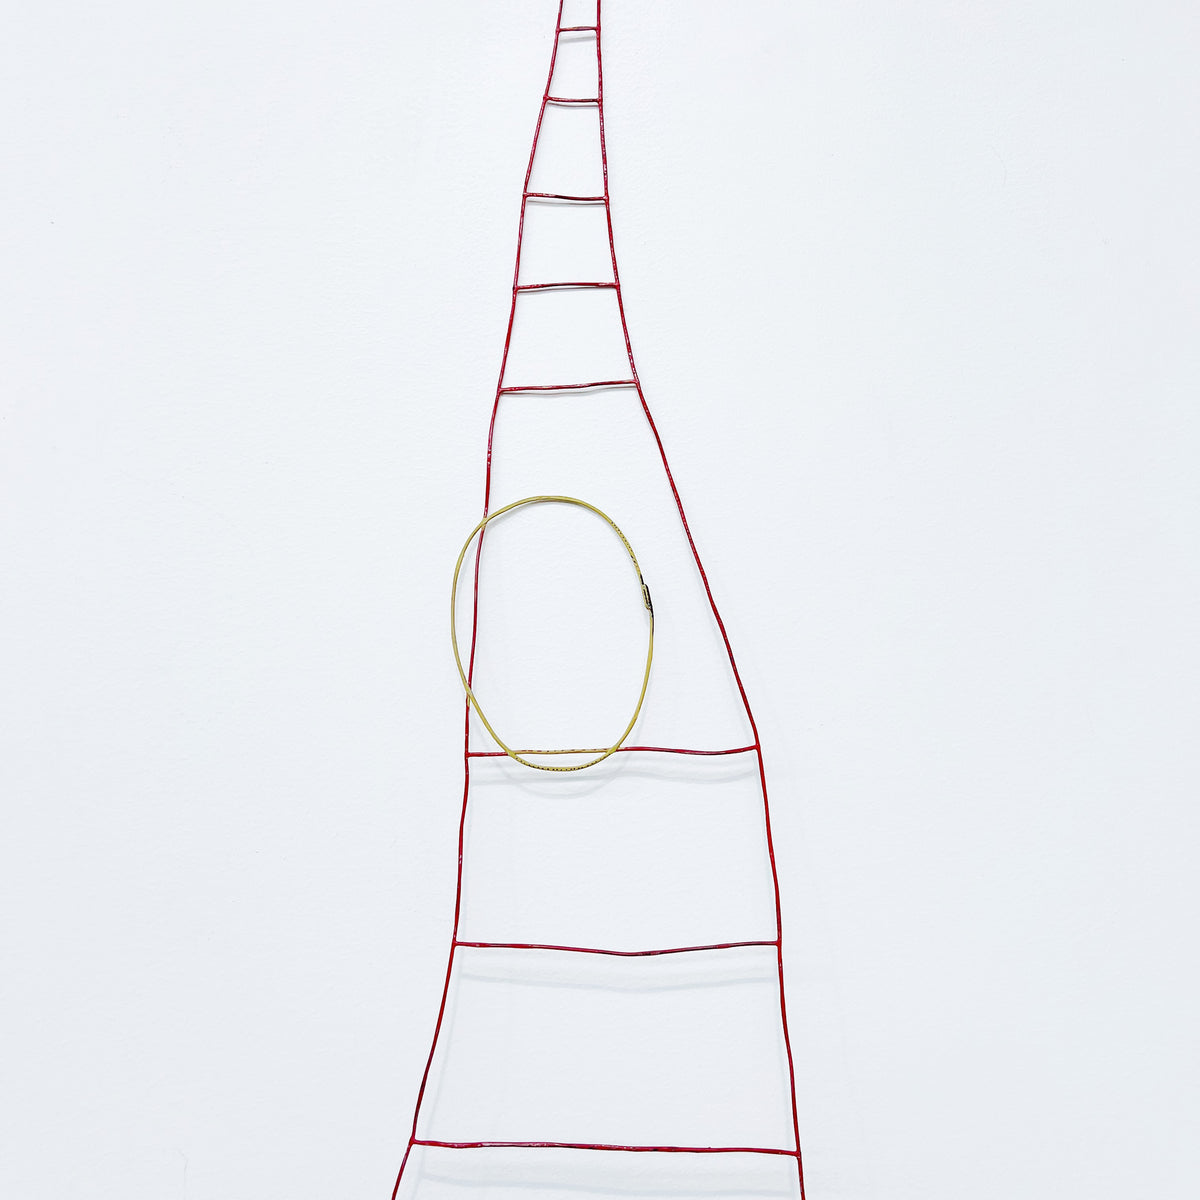 Red Ladder with Yellow Circle